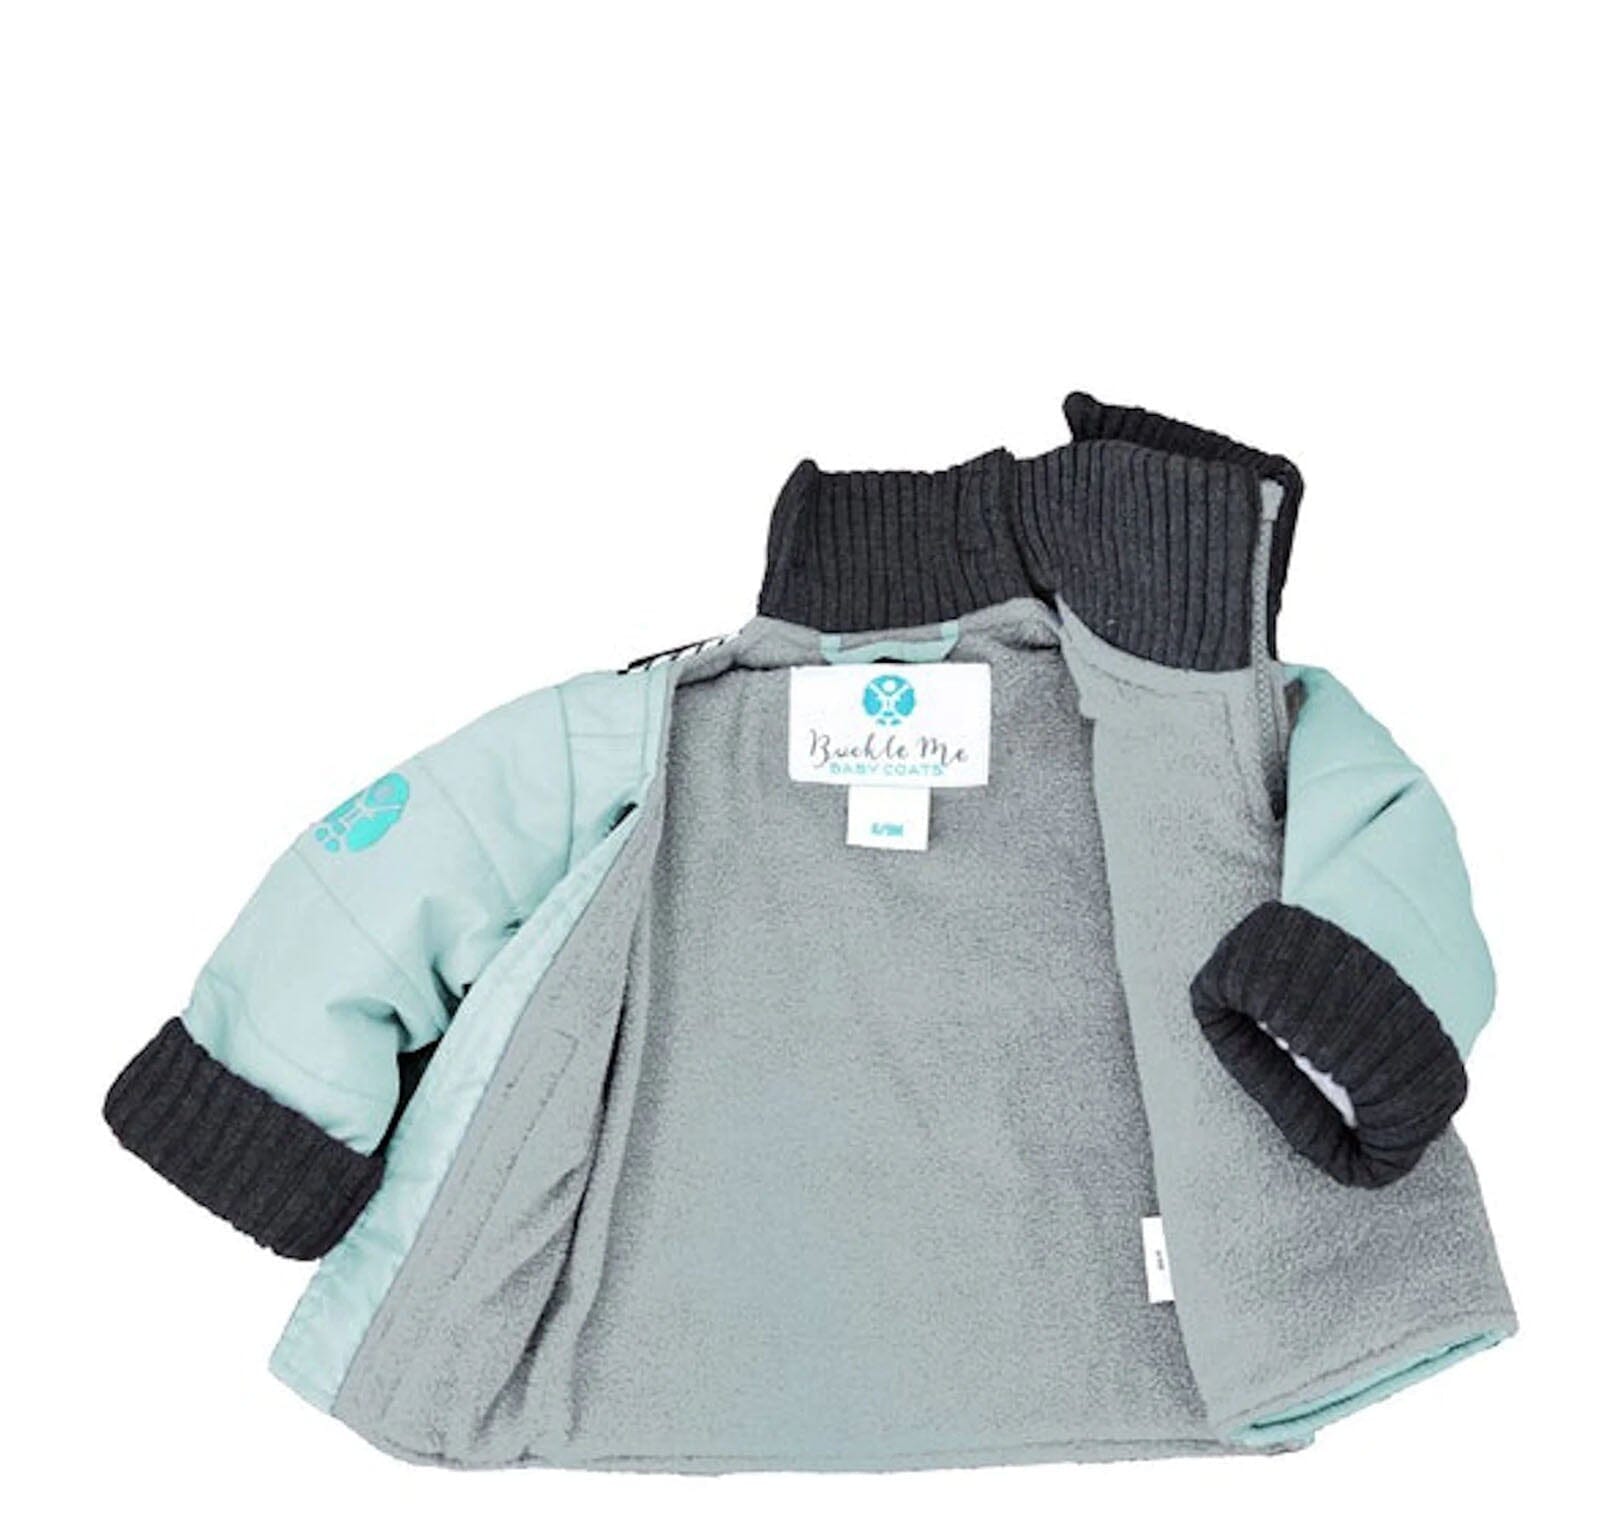 Toast Car Seat Coat - 6/9M / Sunny Days/Blue by Buckle Me Baby Coats